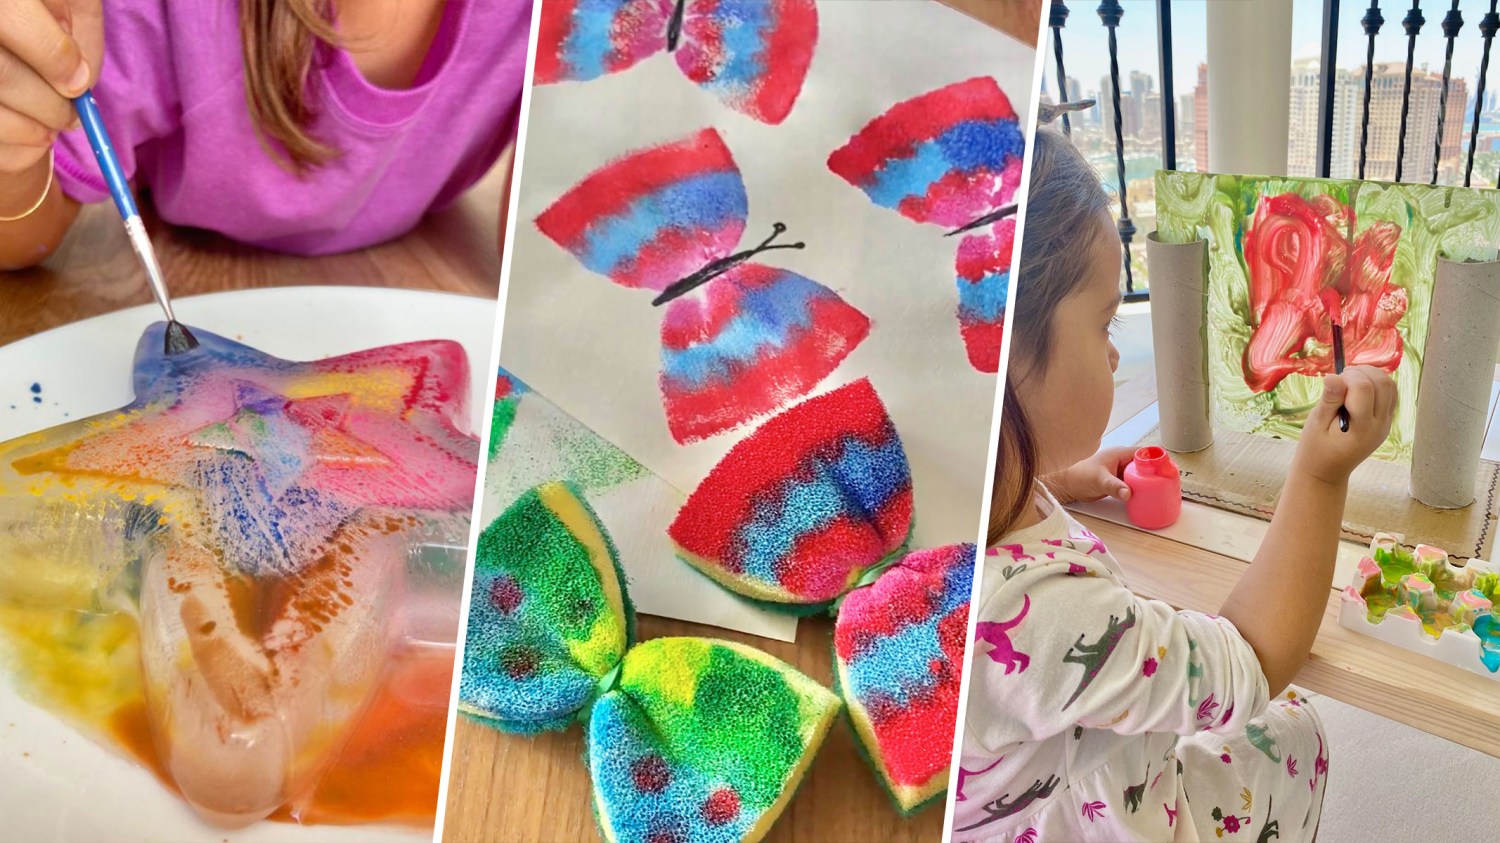 Amazing Art and Craft Ideas for Kids